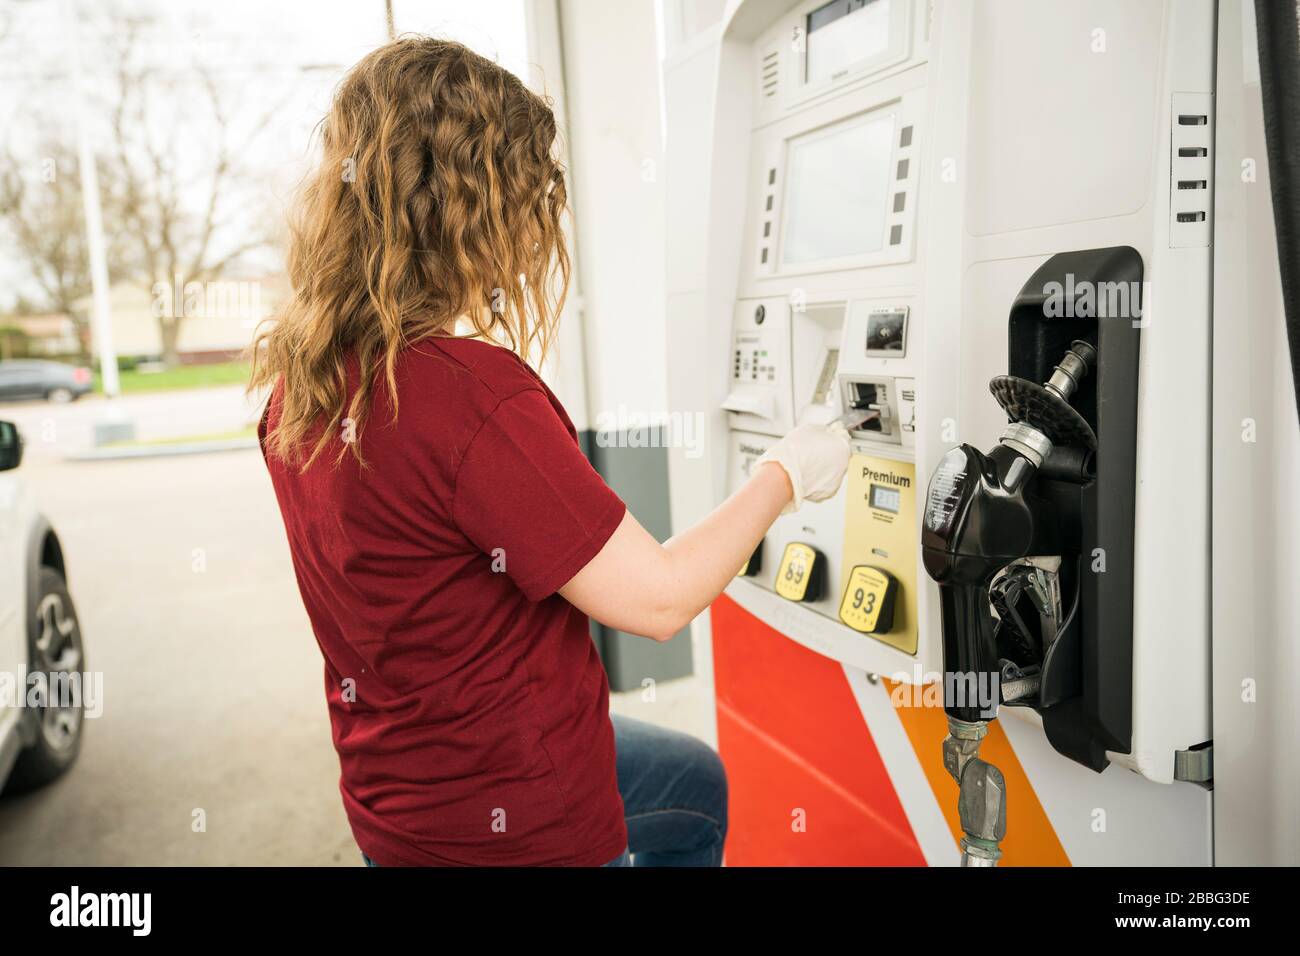 Indiana, USA - March 24, 2020: A blond female wearing protective  gloves fills up her car with gasoline at the gas station during the corona virus COV Stock Photo